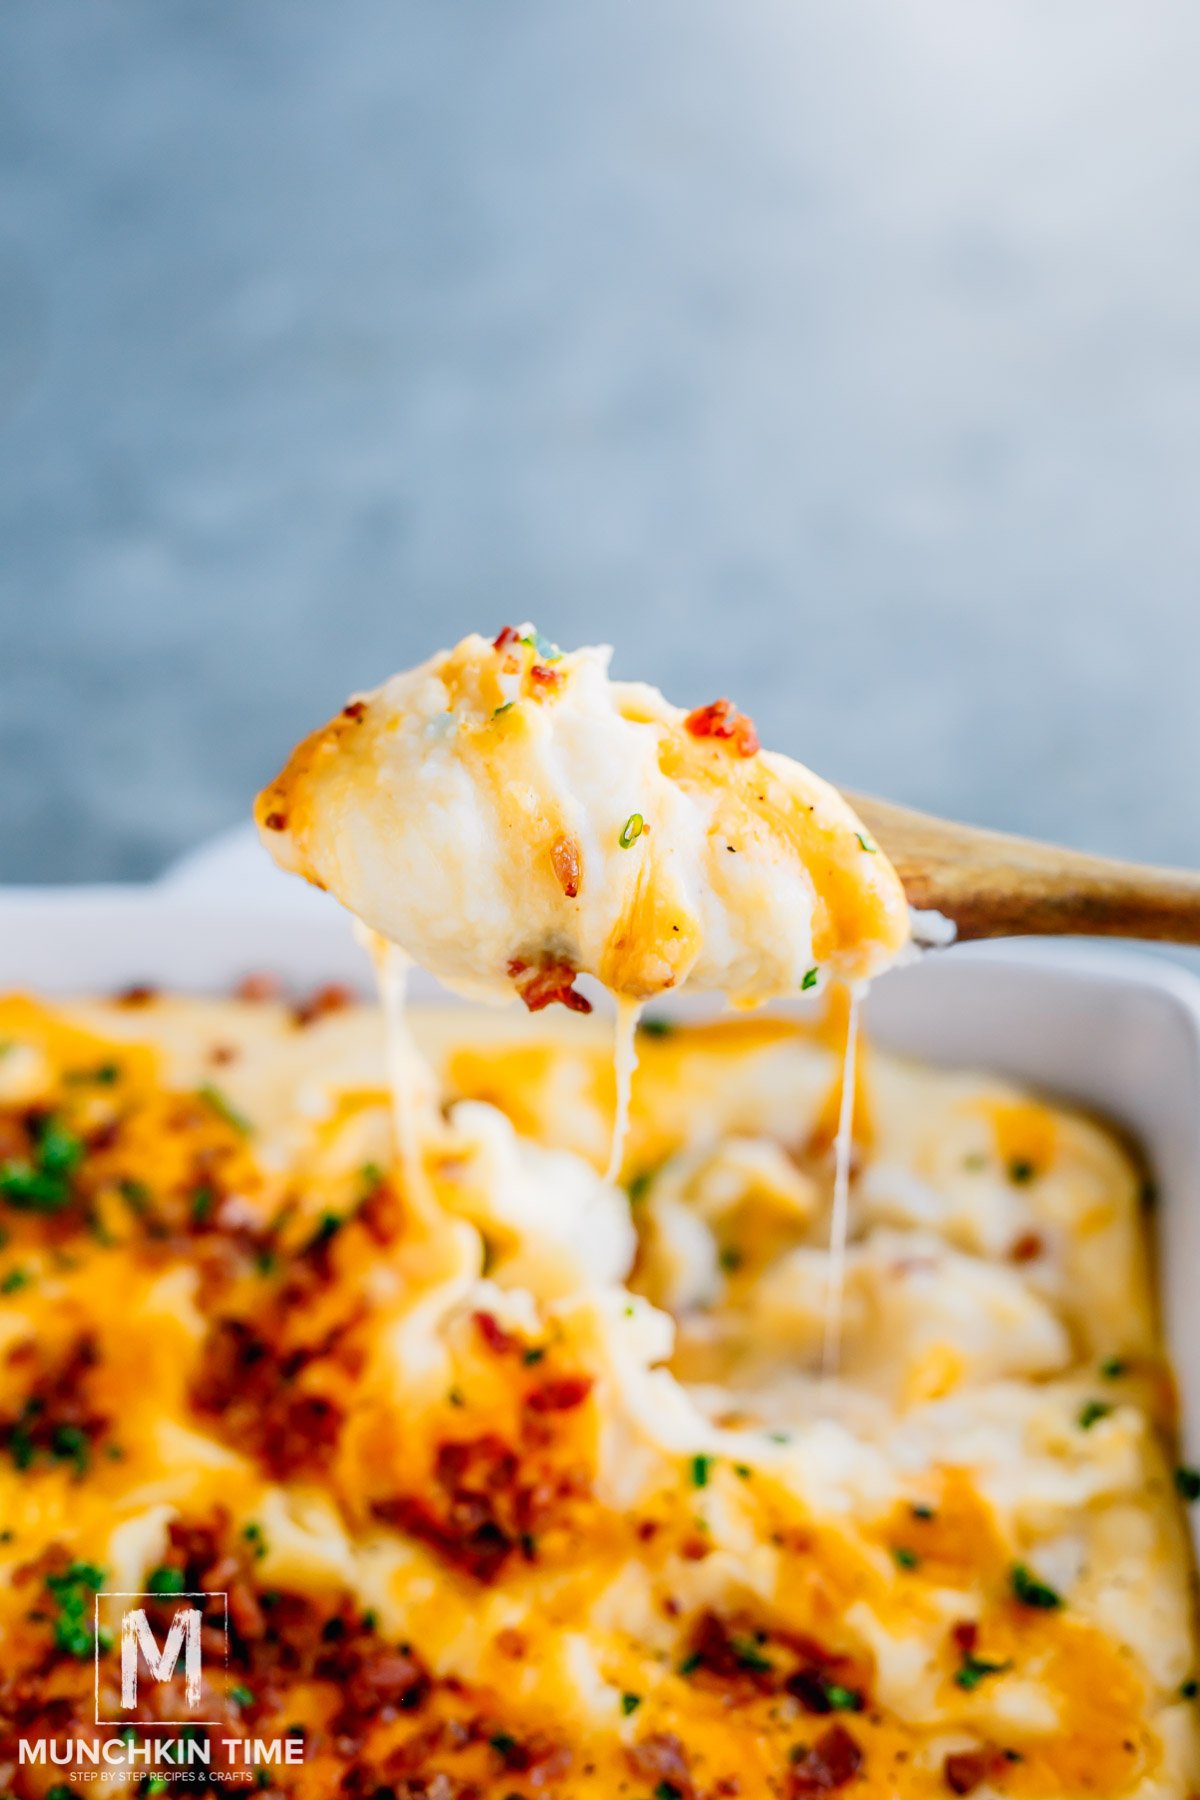 A wooden spoon pulling up a scoop of cheesy mashed potato.